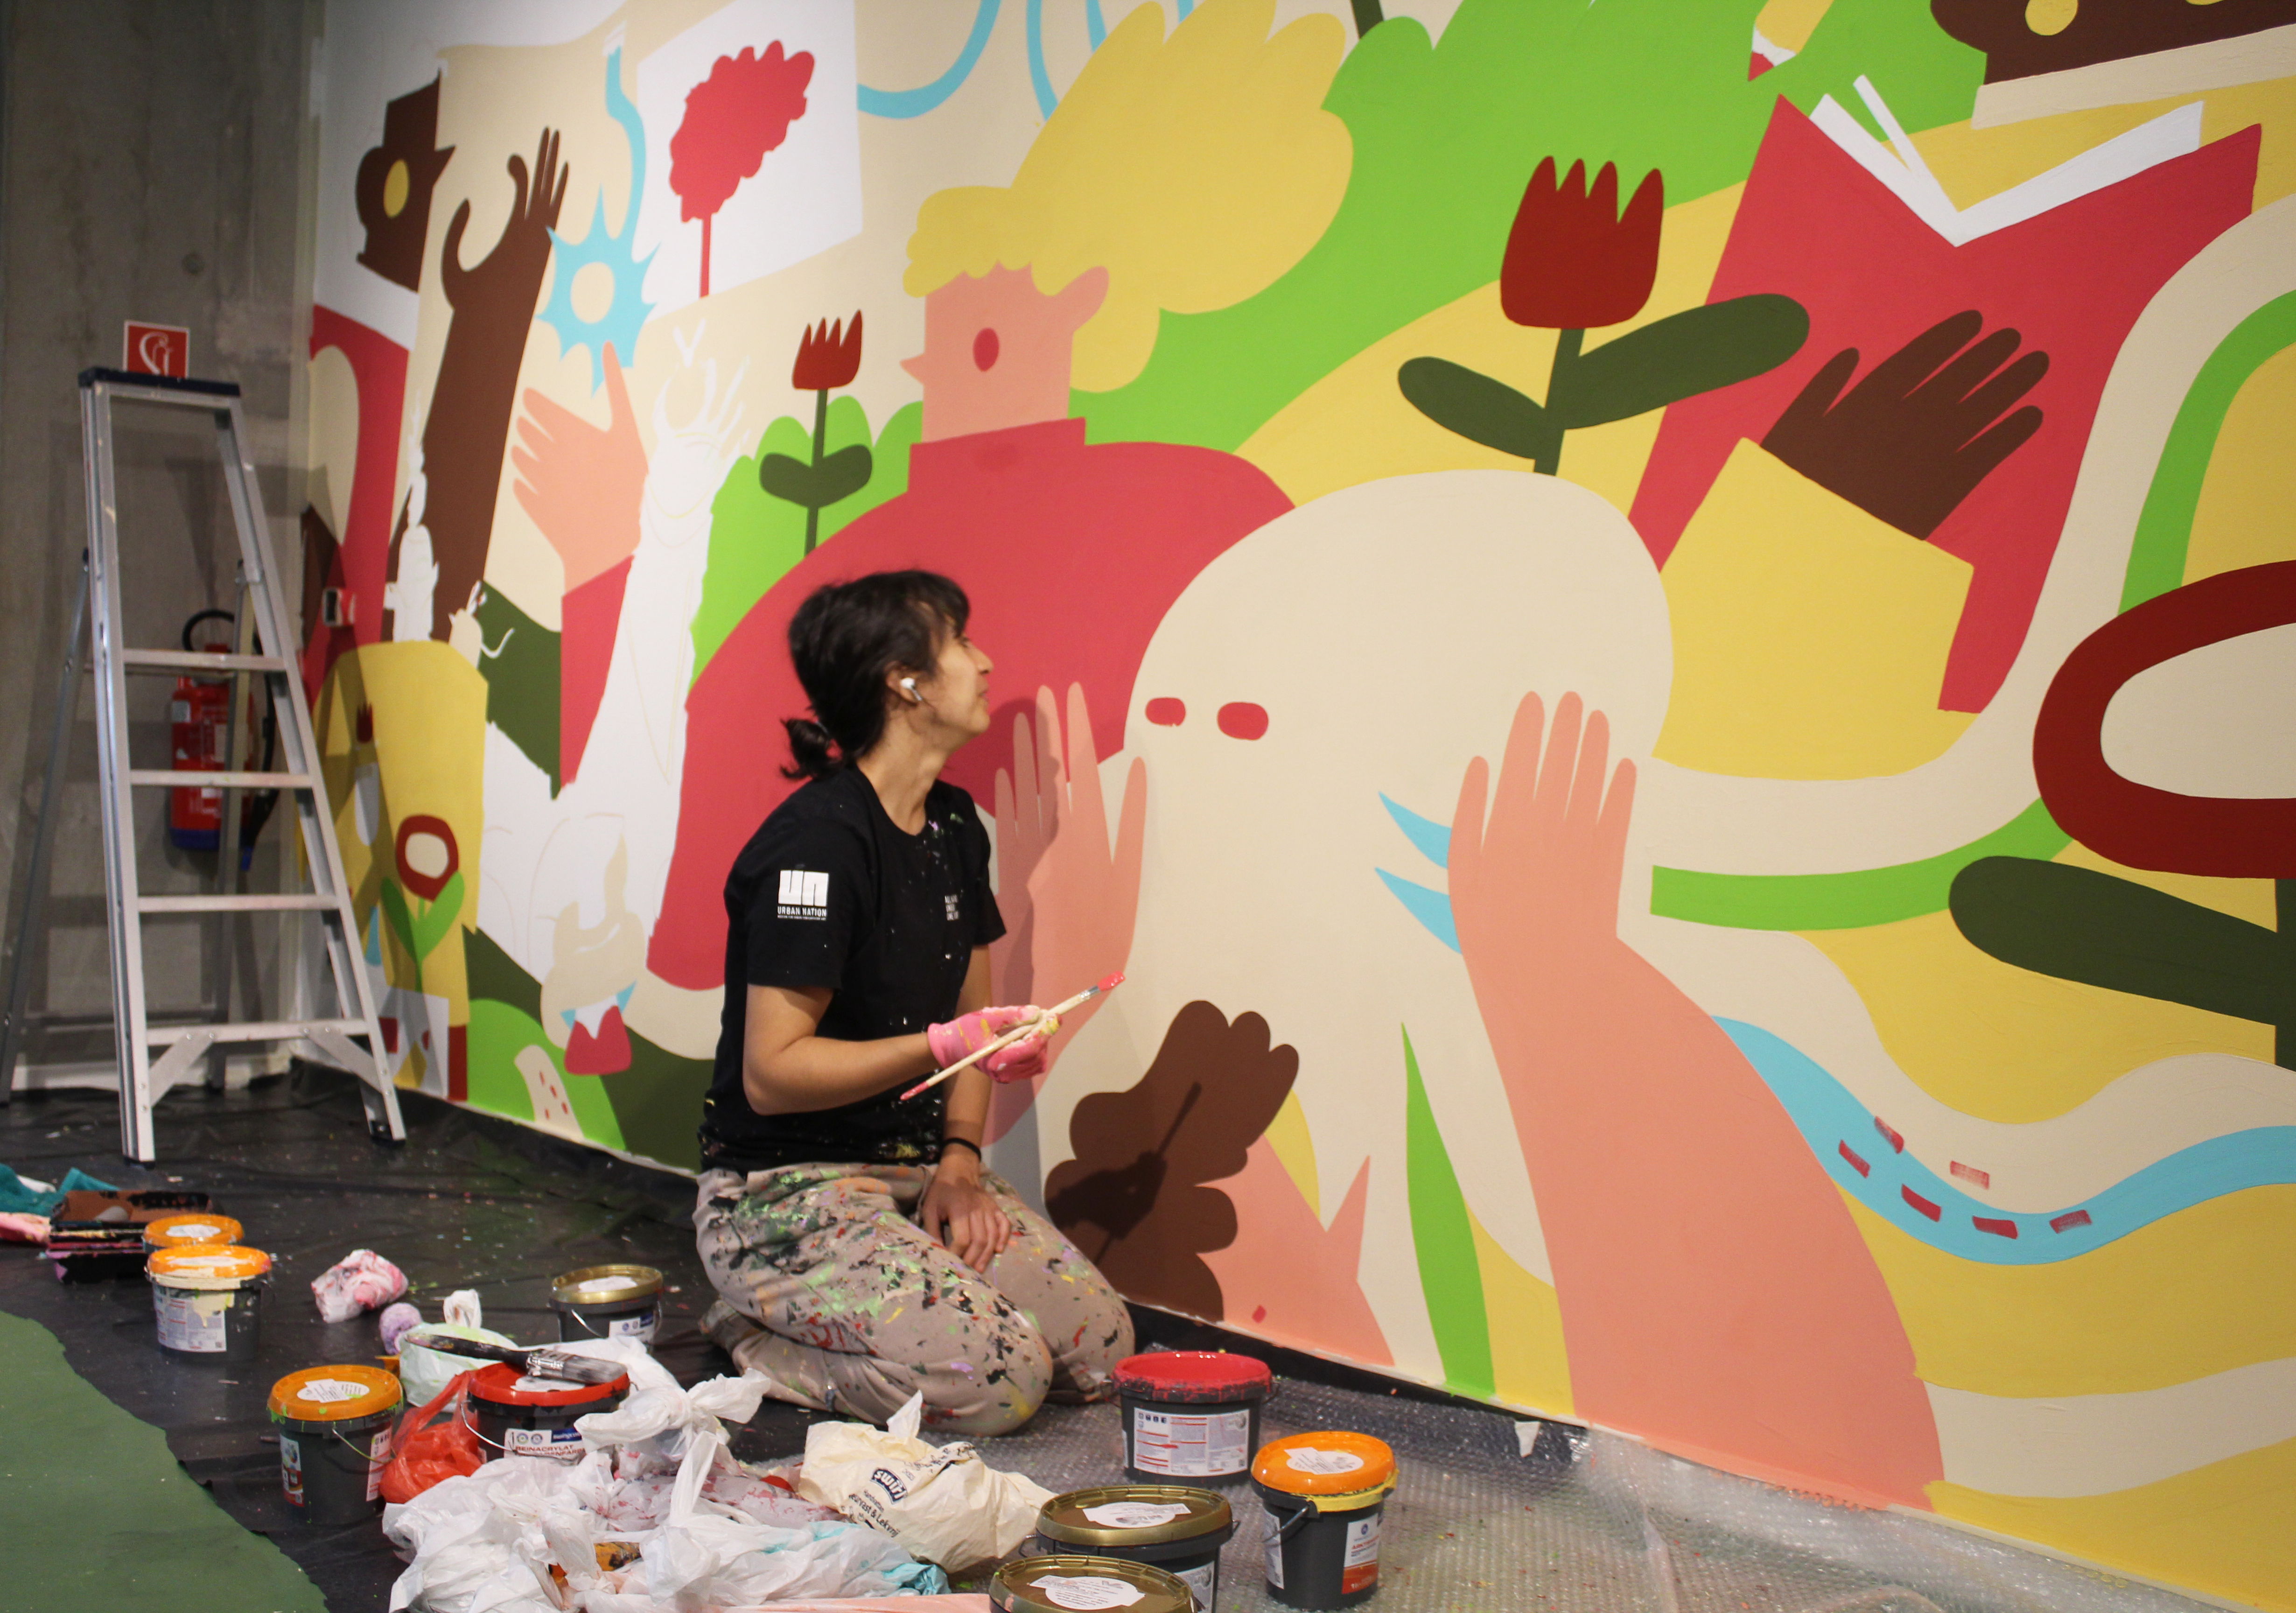 Júlia, in the process of creating the mural